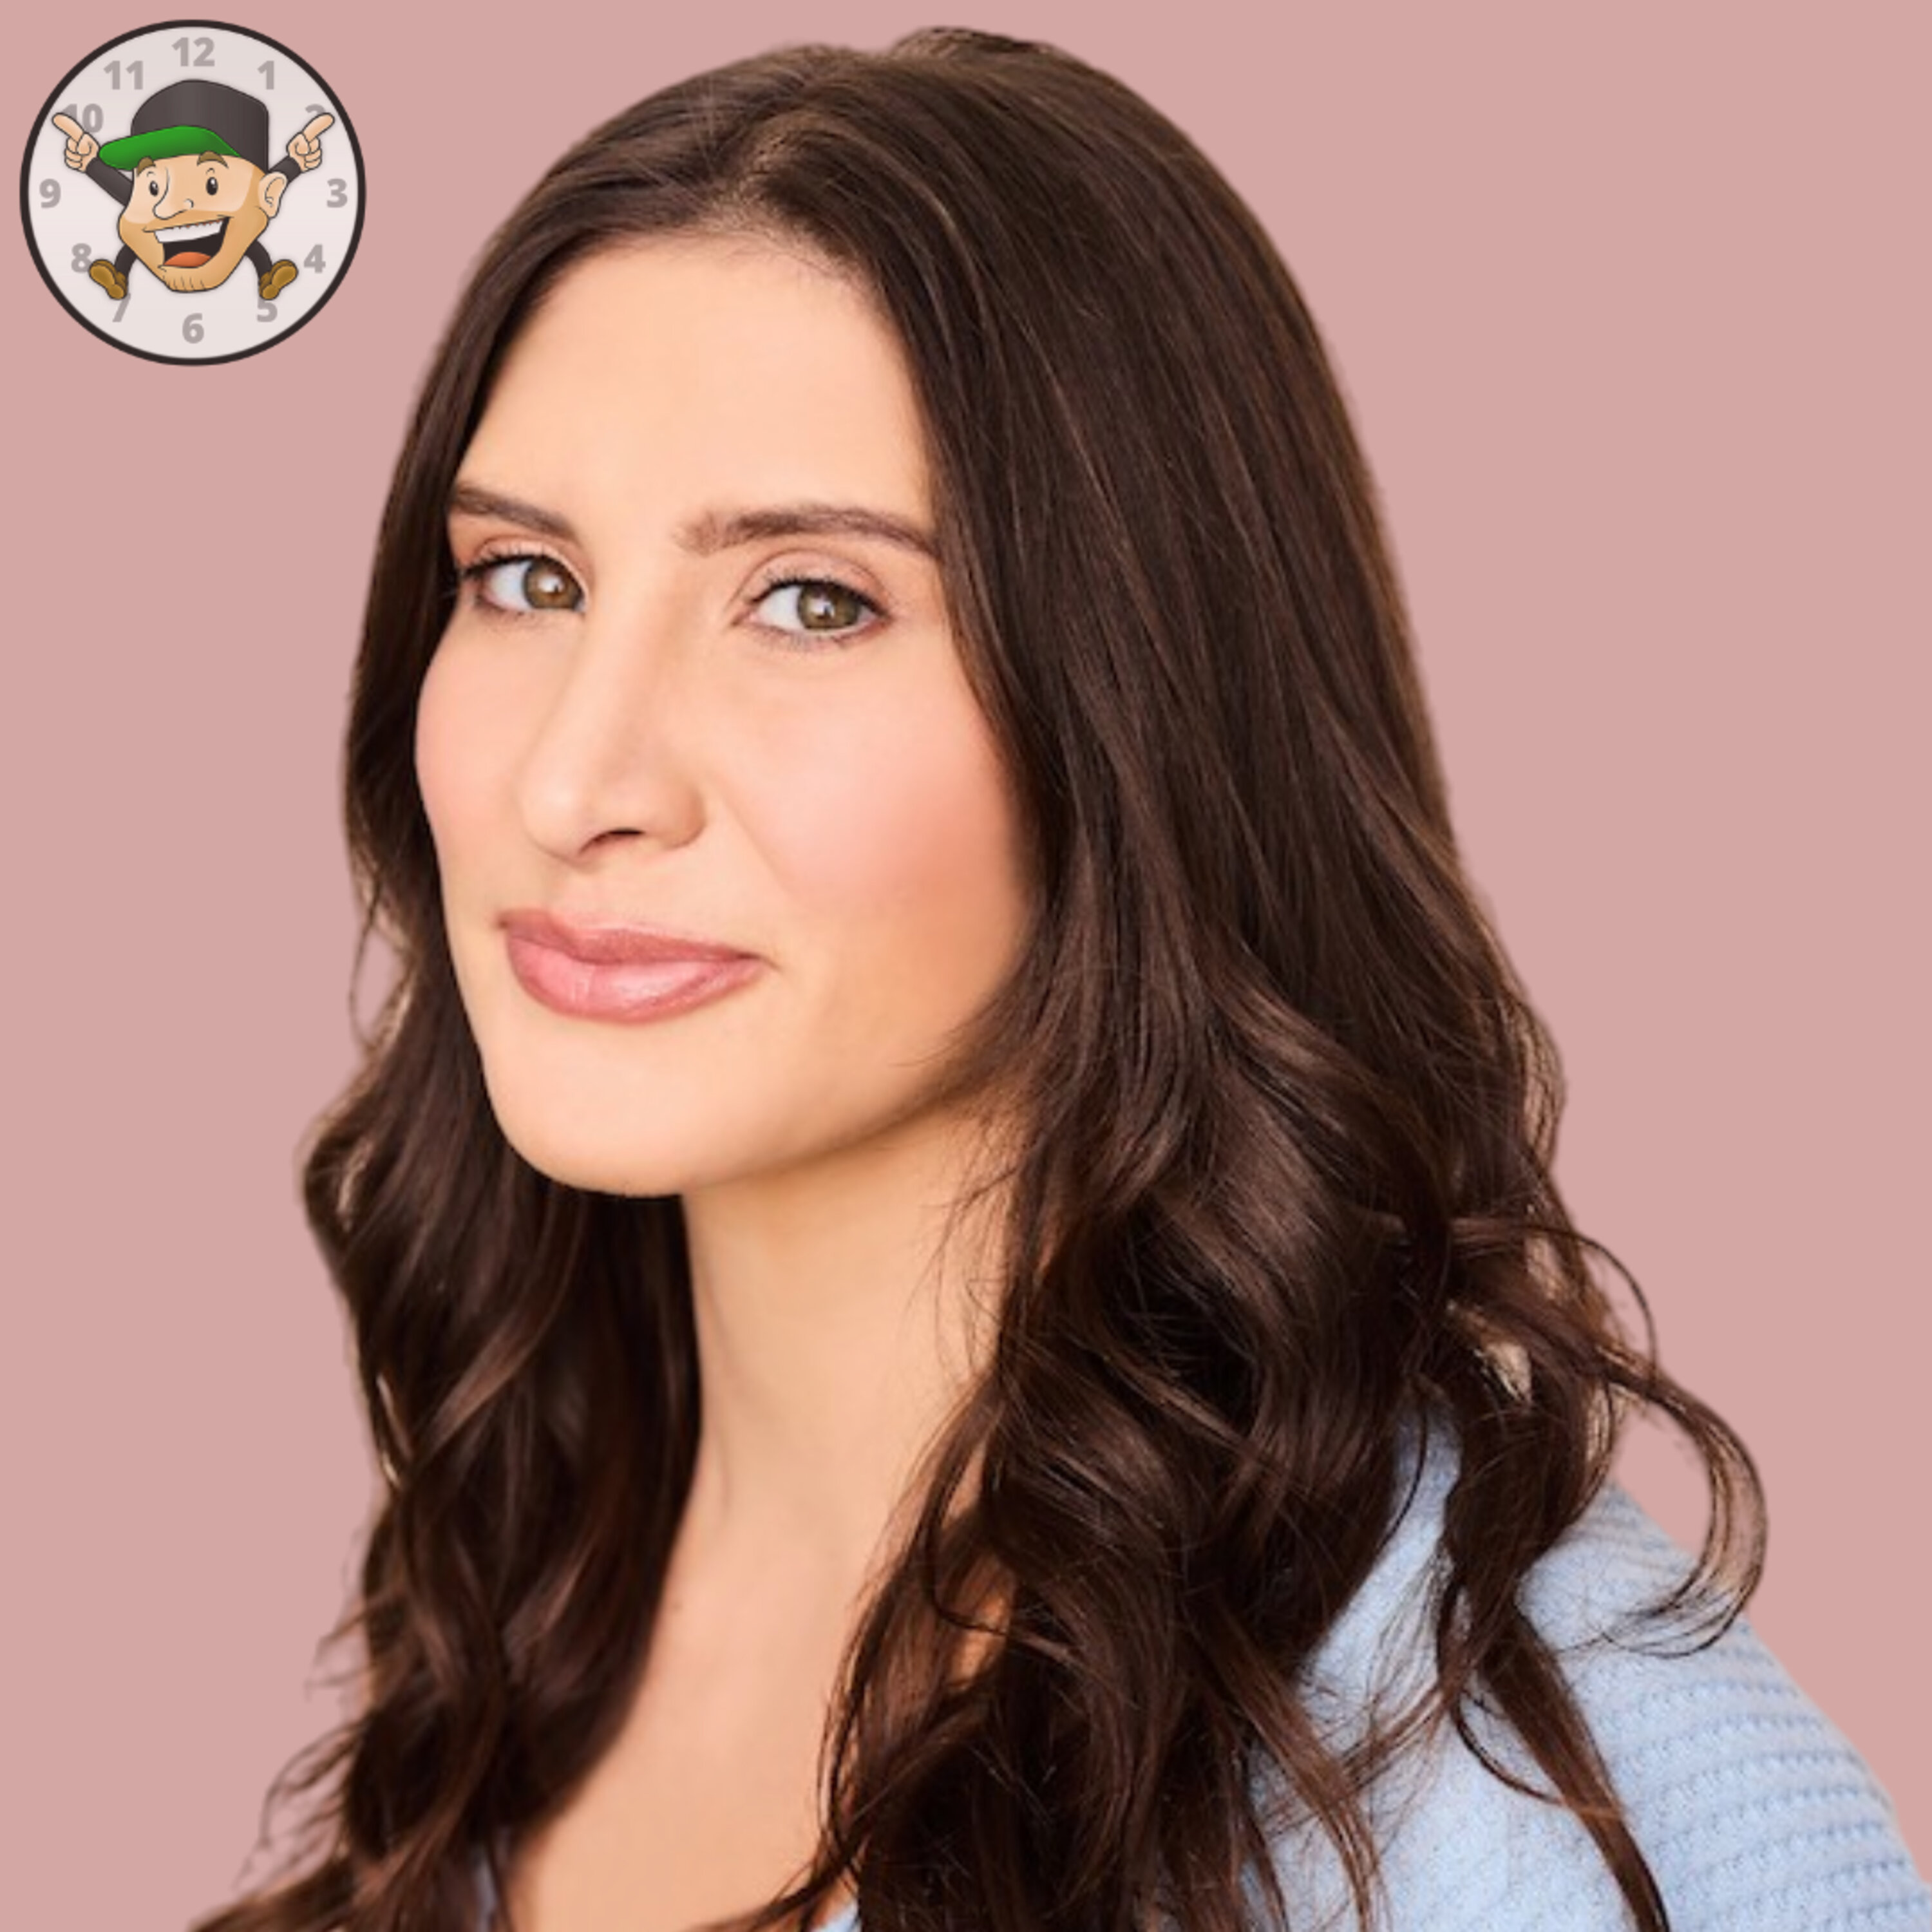 Interview w/ Marley Freygang of the Confessions of a Wannabe It Girl Podcast